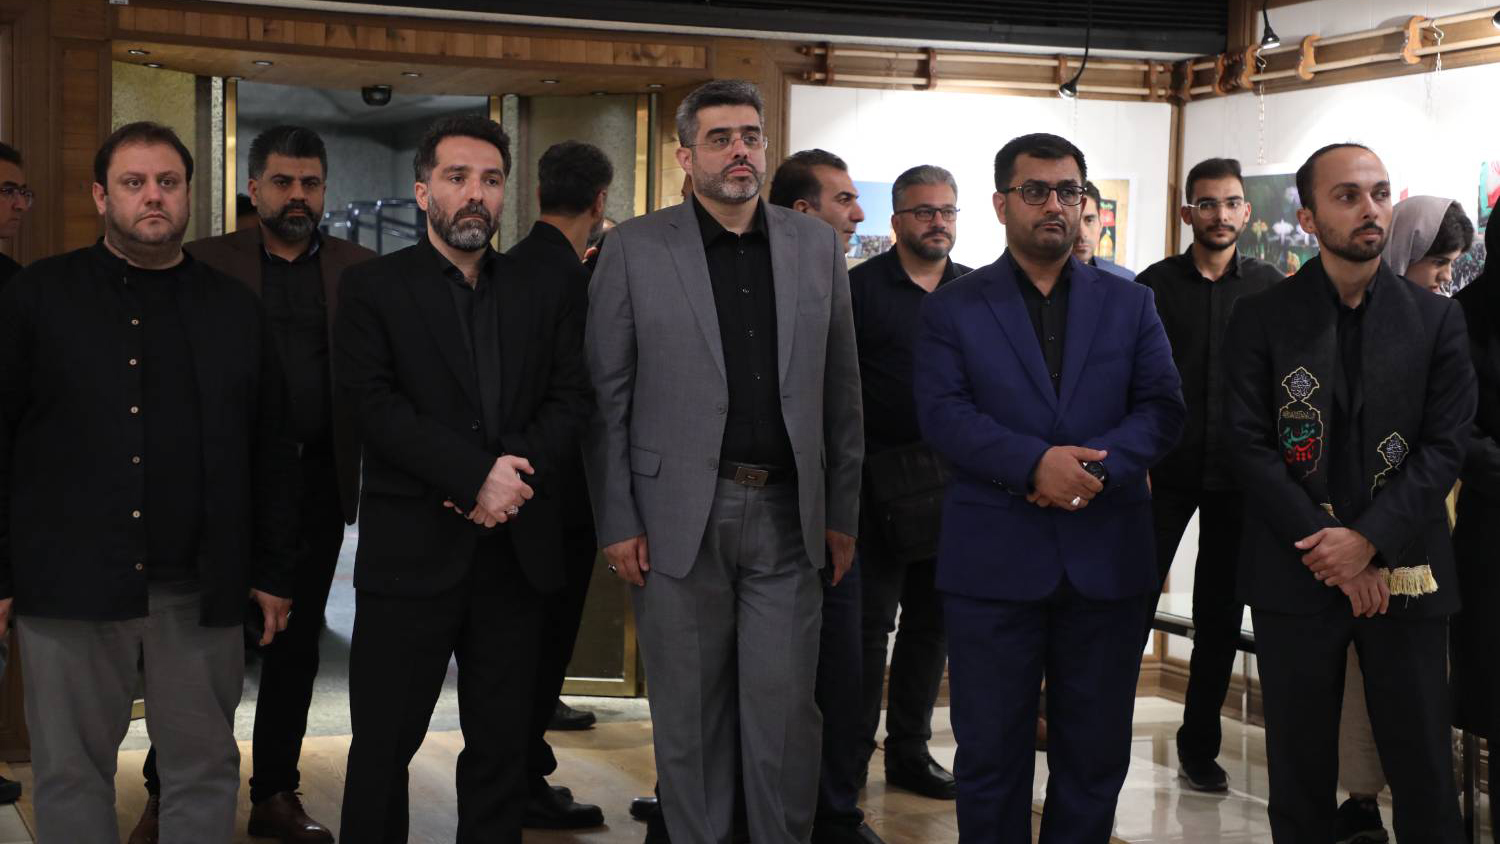 The opening ceremony of "Ashurai Art Mourning" was held in Tehran's Azadi Tower complex with the presence of artists from various fields and cultural managers.